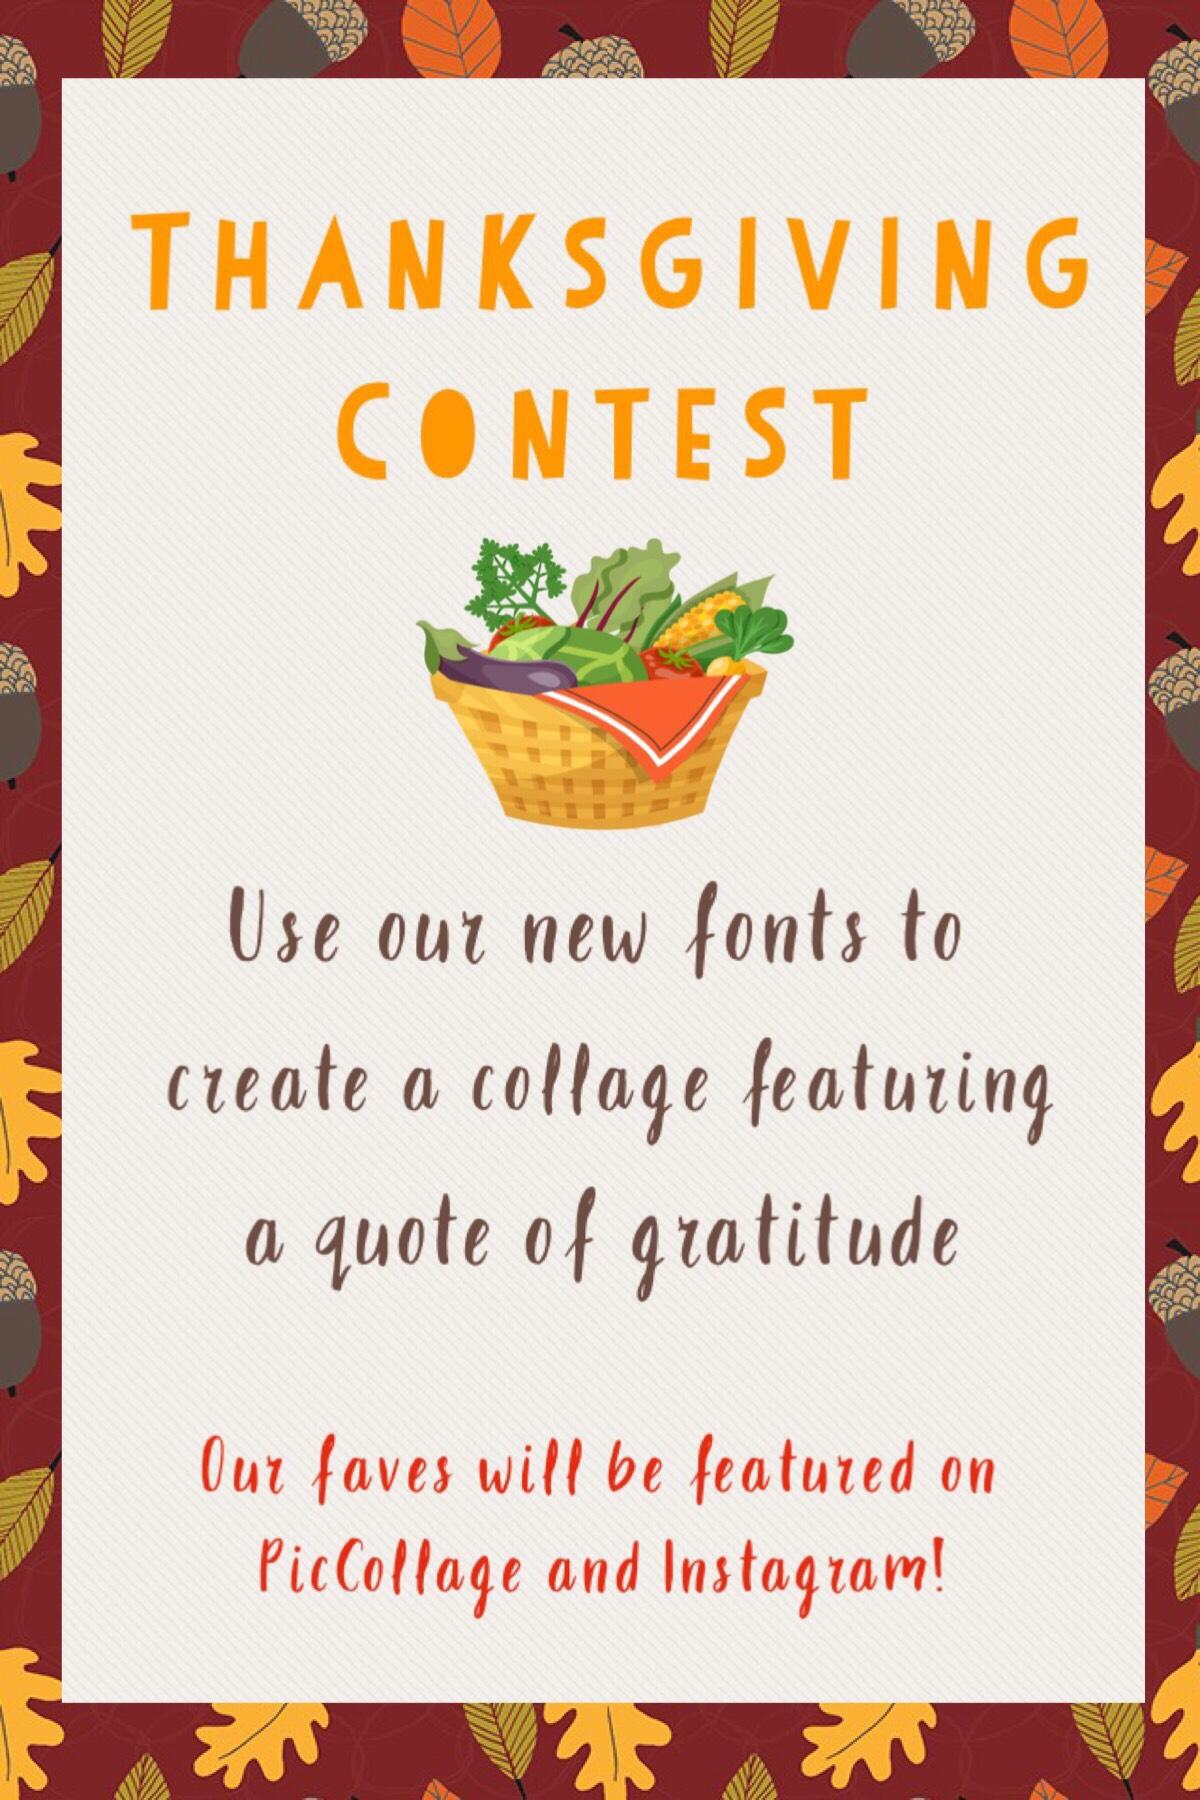 Check out our Thanksgiving Contest! Deadline is November 22, 2018! 🦃